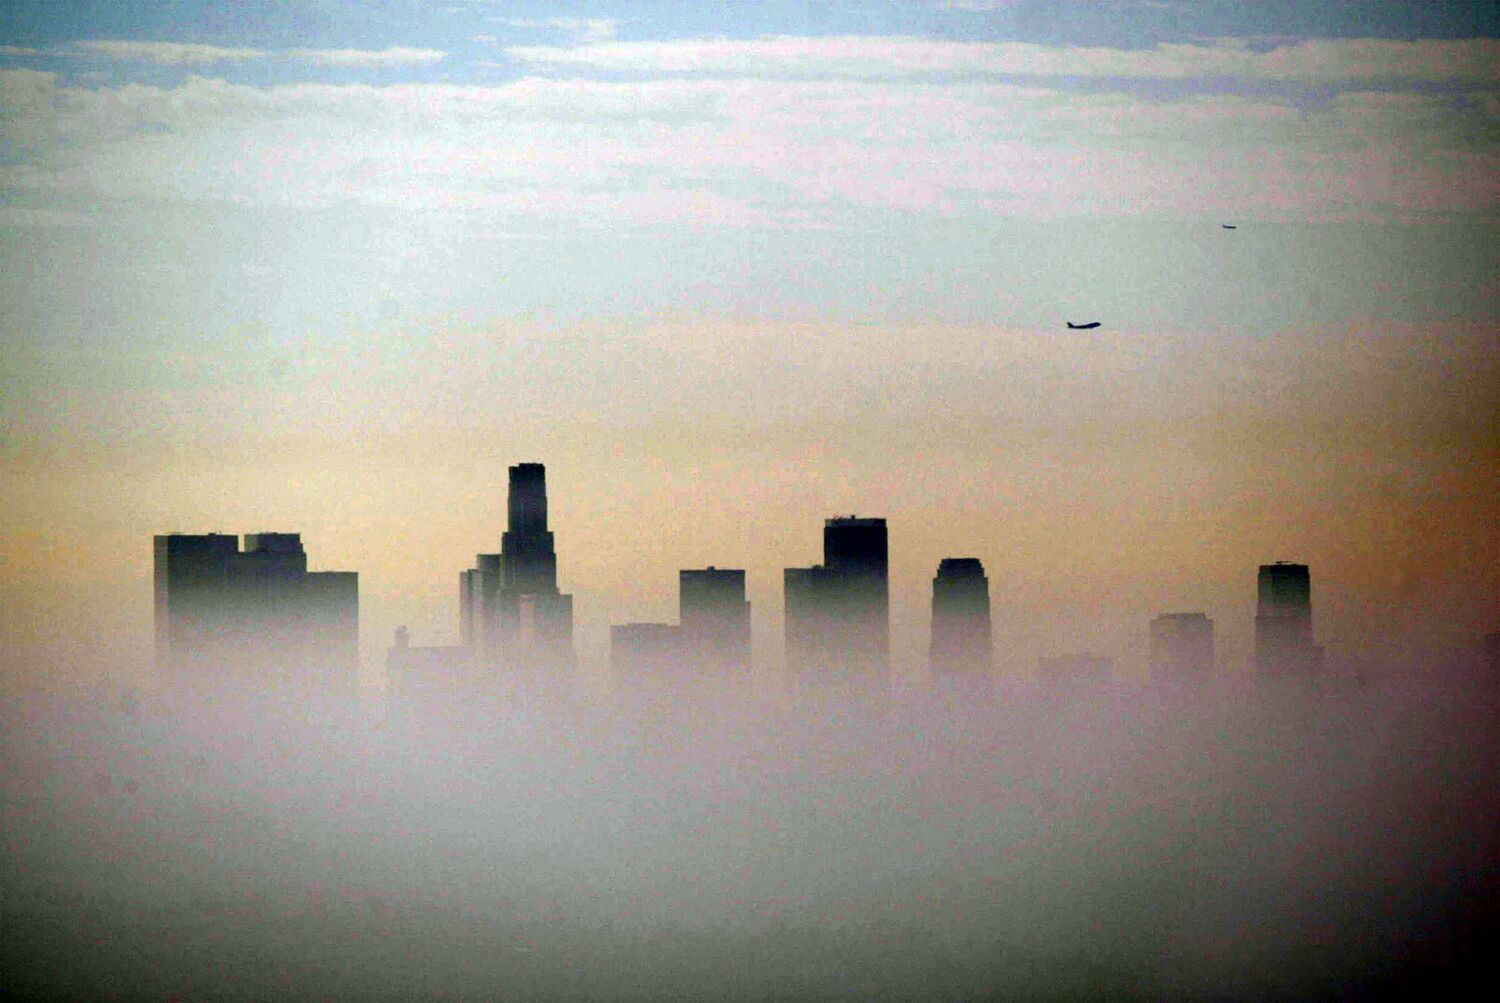 Local air regulators say it's impossible to meet smog standards without federal help